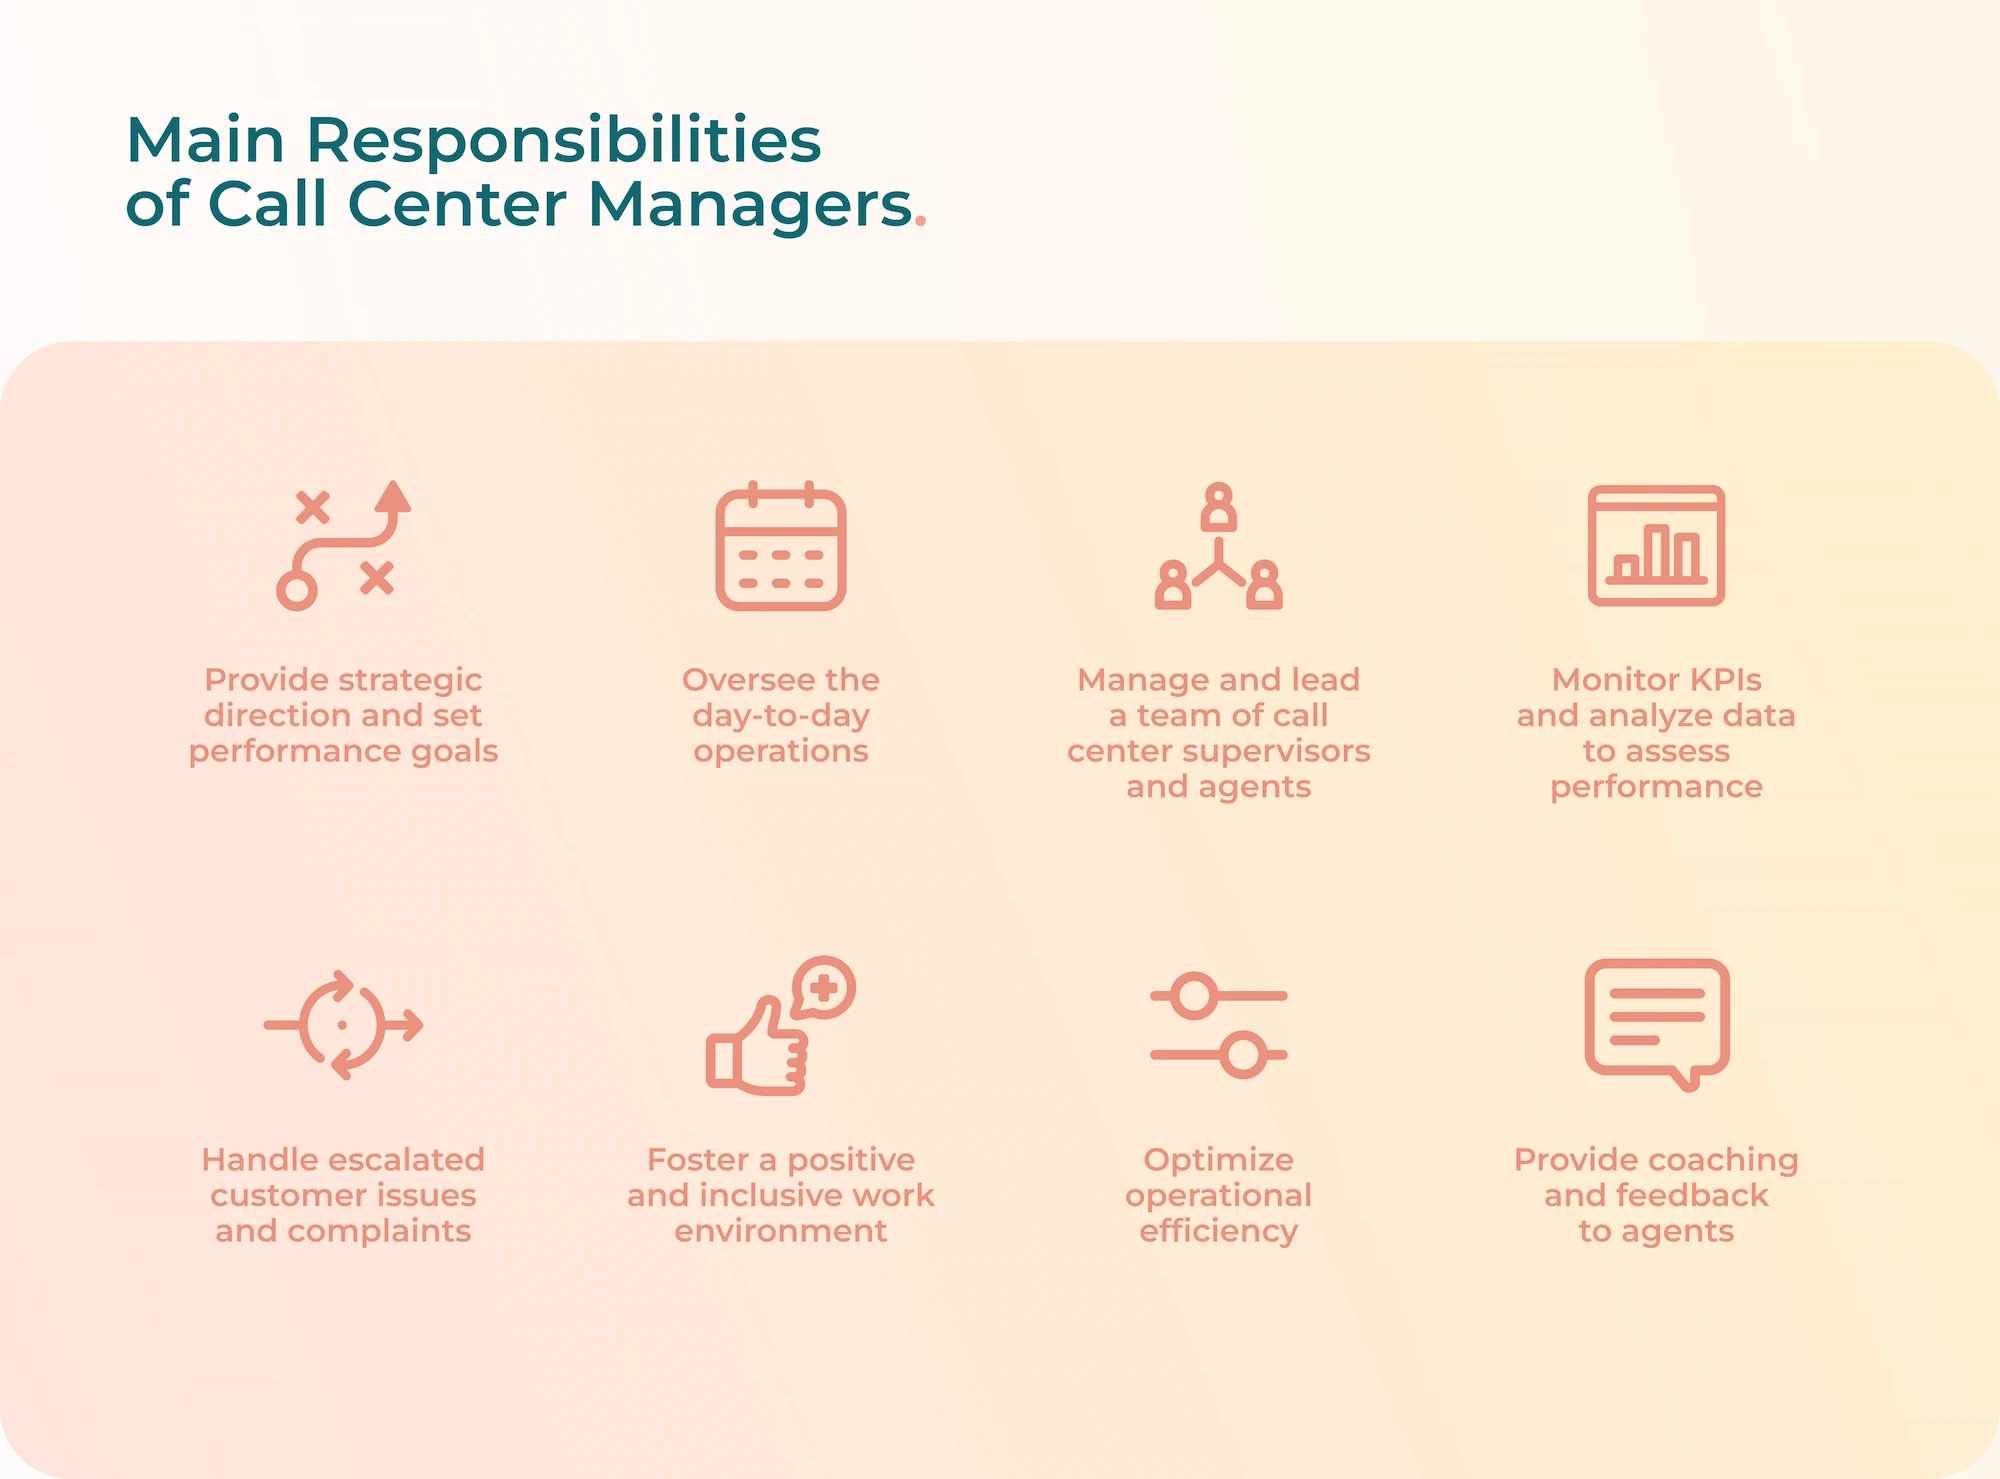 List of main responsibilities of call center managers